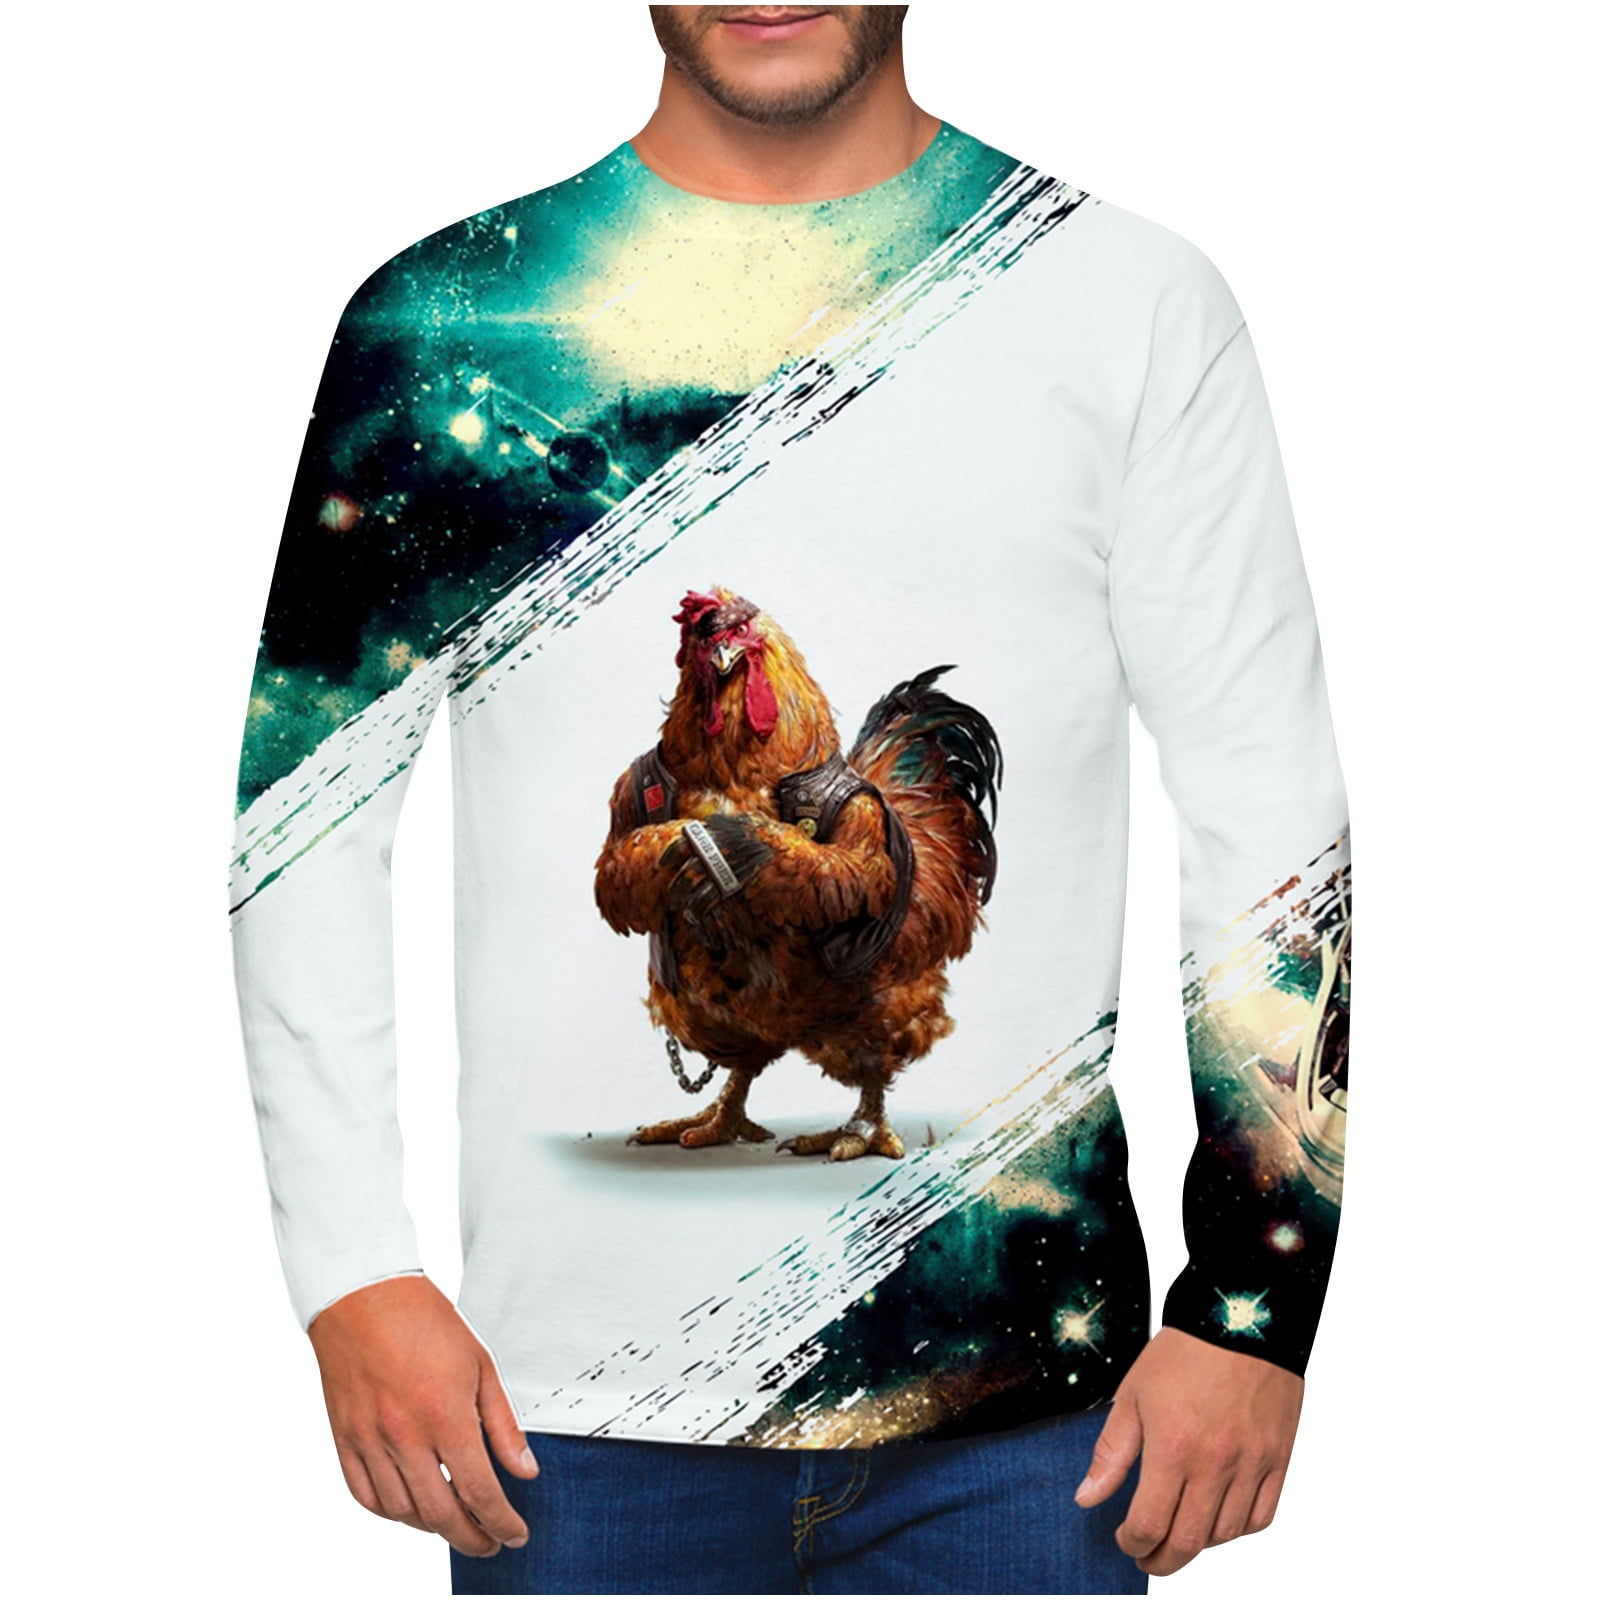 jsaierl Long Sleeve Shirts for Men 3D Chicken Graphic Top Casual Crew Neck  Color Block Novelty Tee T-shirt 